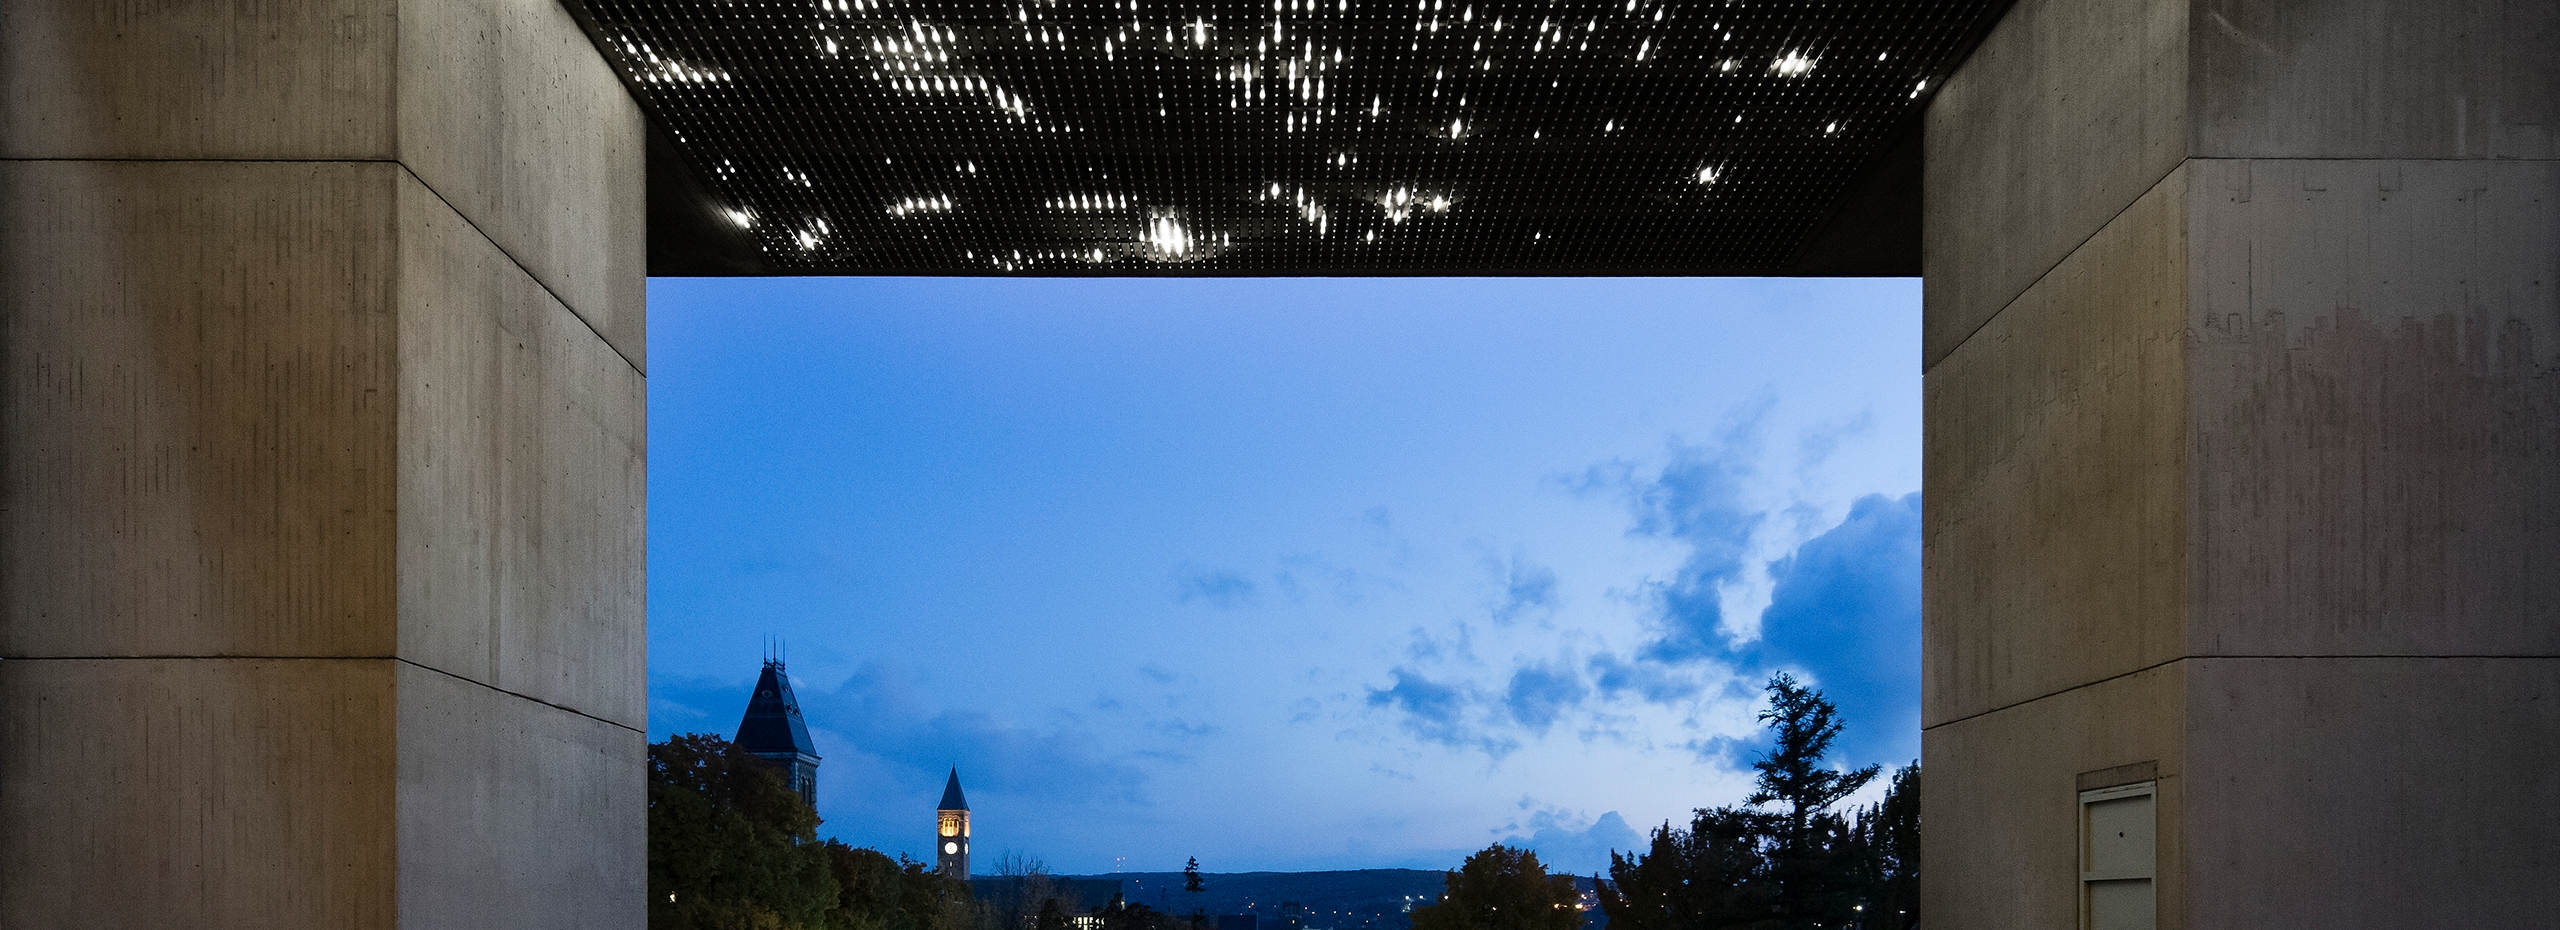 The ceiling of an outdoor courtyard is covered with thousands of white lights at twilight